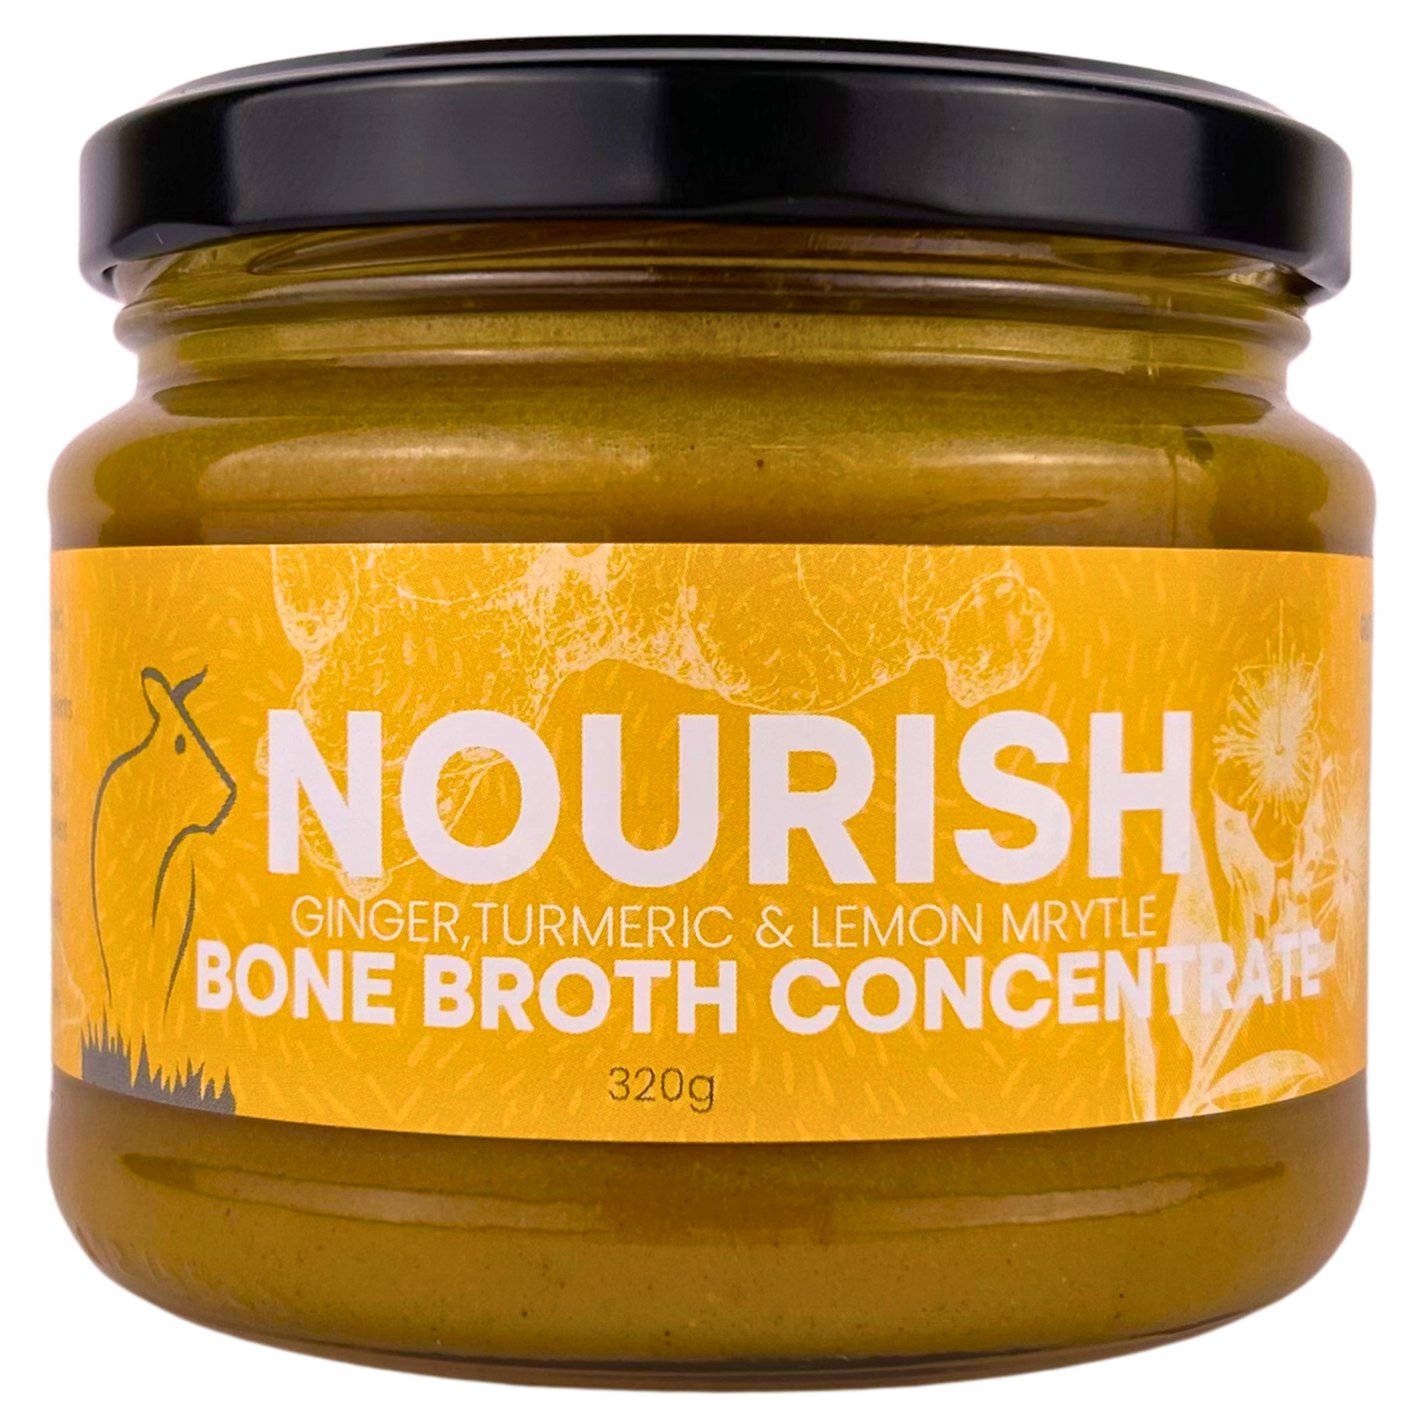 NOURISH - Concentrated Beef Bone Broth with Ginger Turmeric and Black Pepper